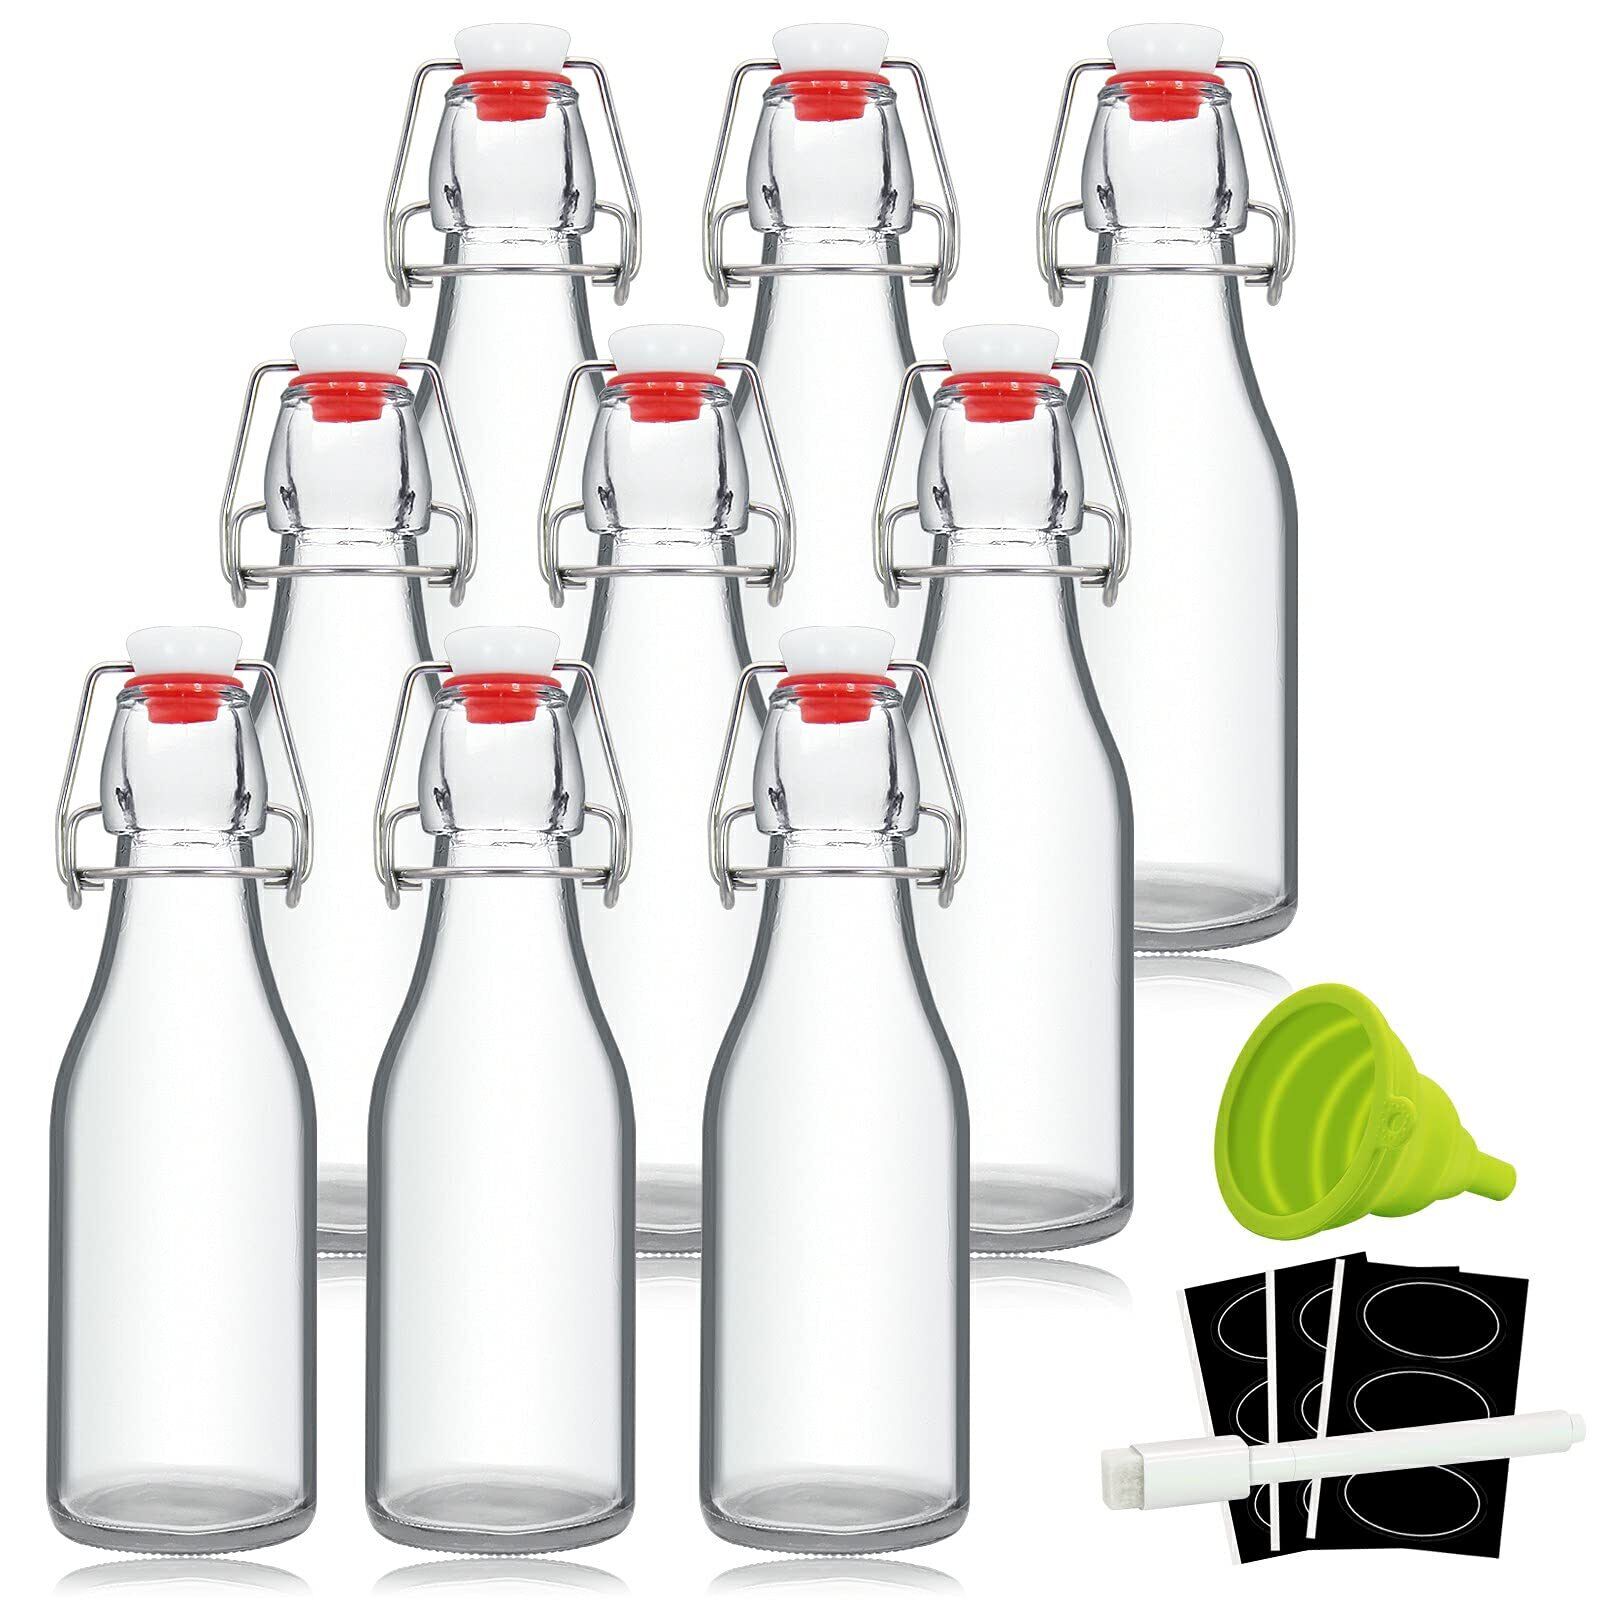 8oz Swing Top Bottles - Glass Beer Bottle with Airtight Rubber Seal Flip Caps...